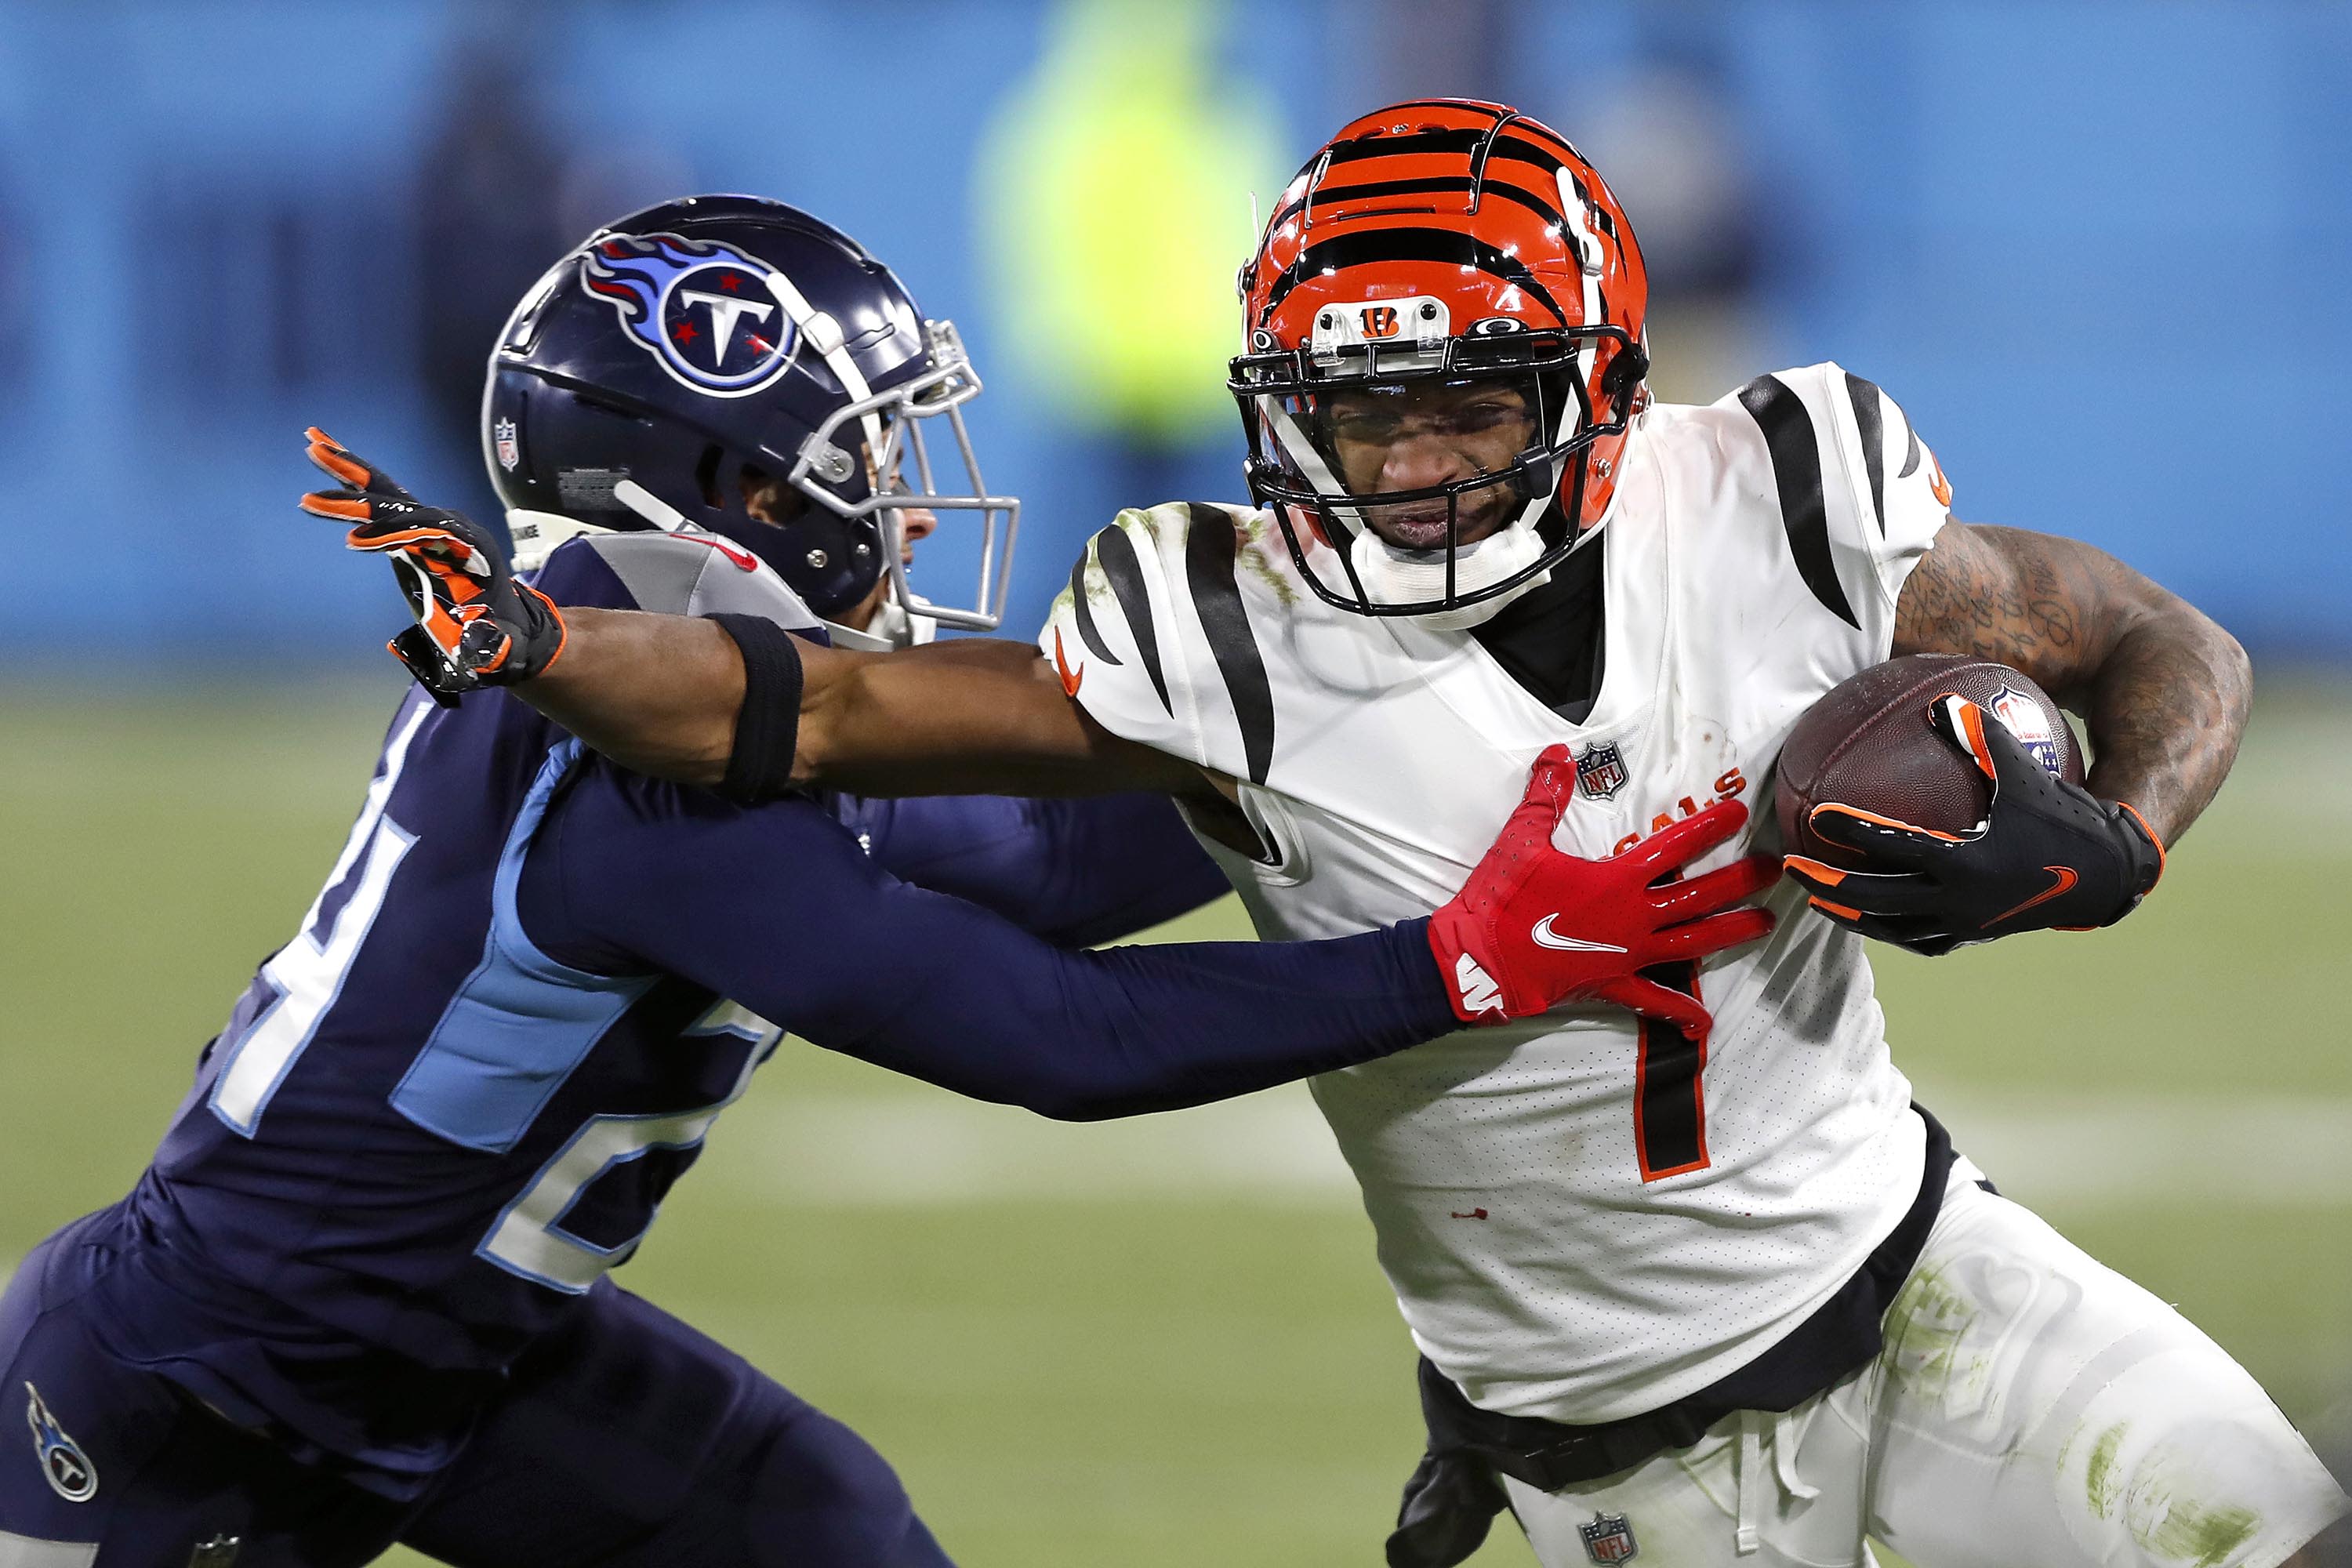 2022 NFL playoffs: Bengals haven't won a playoff game in so long